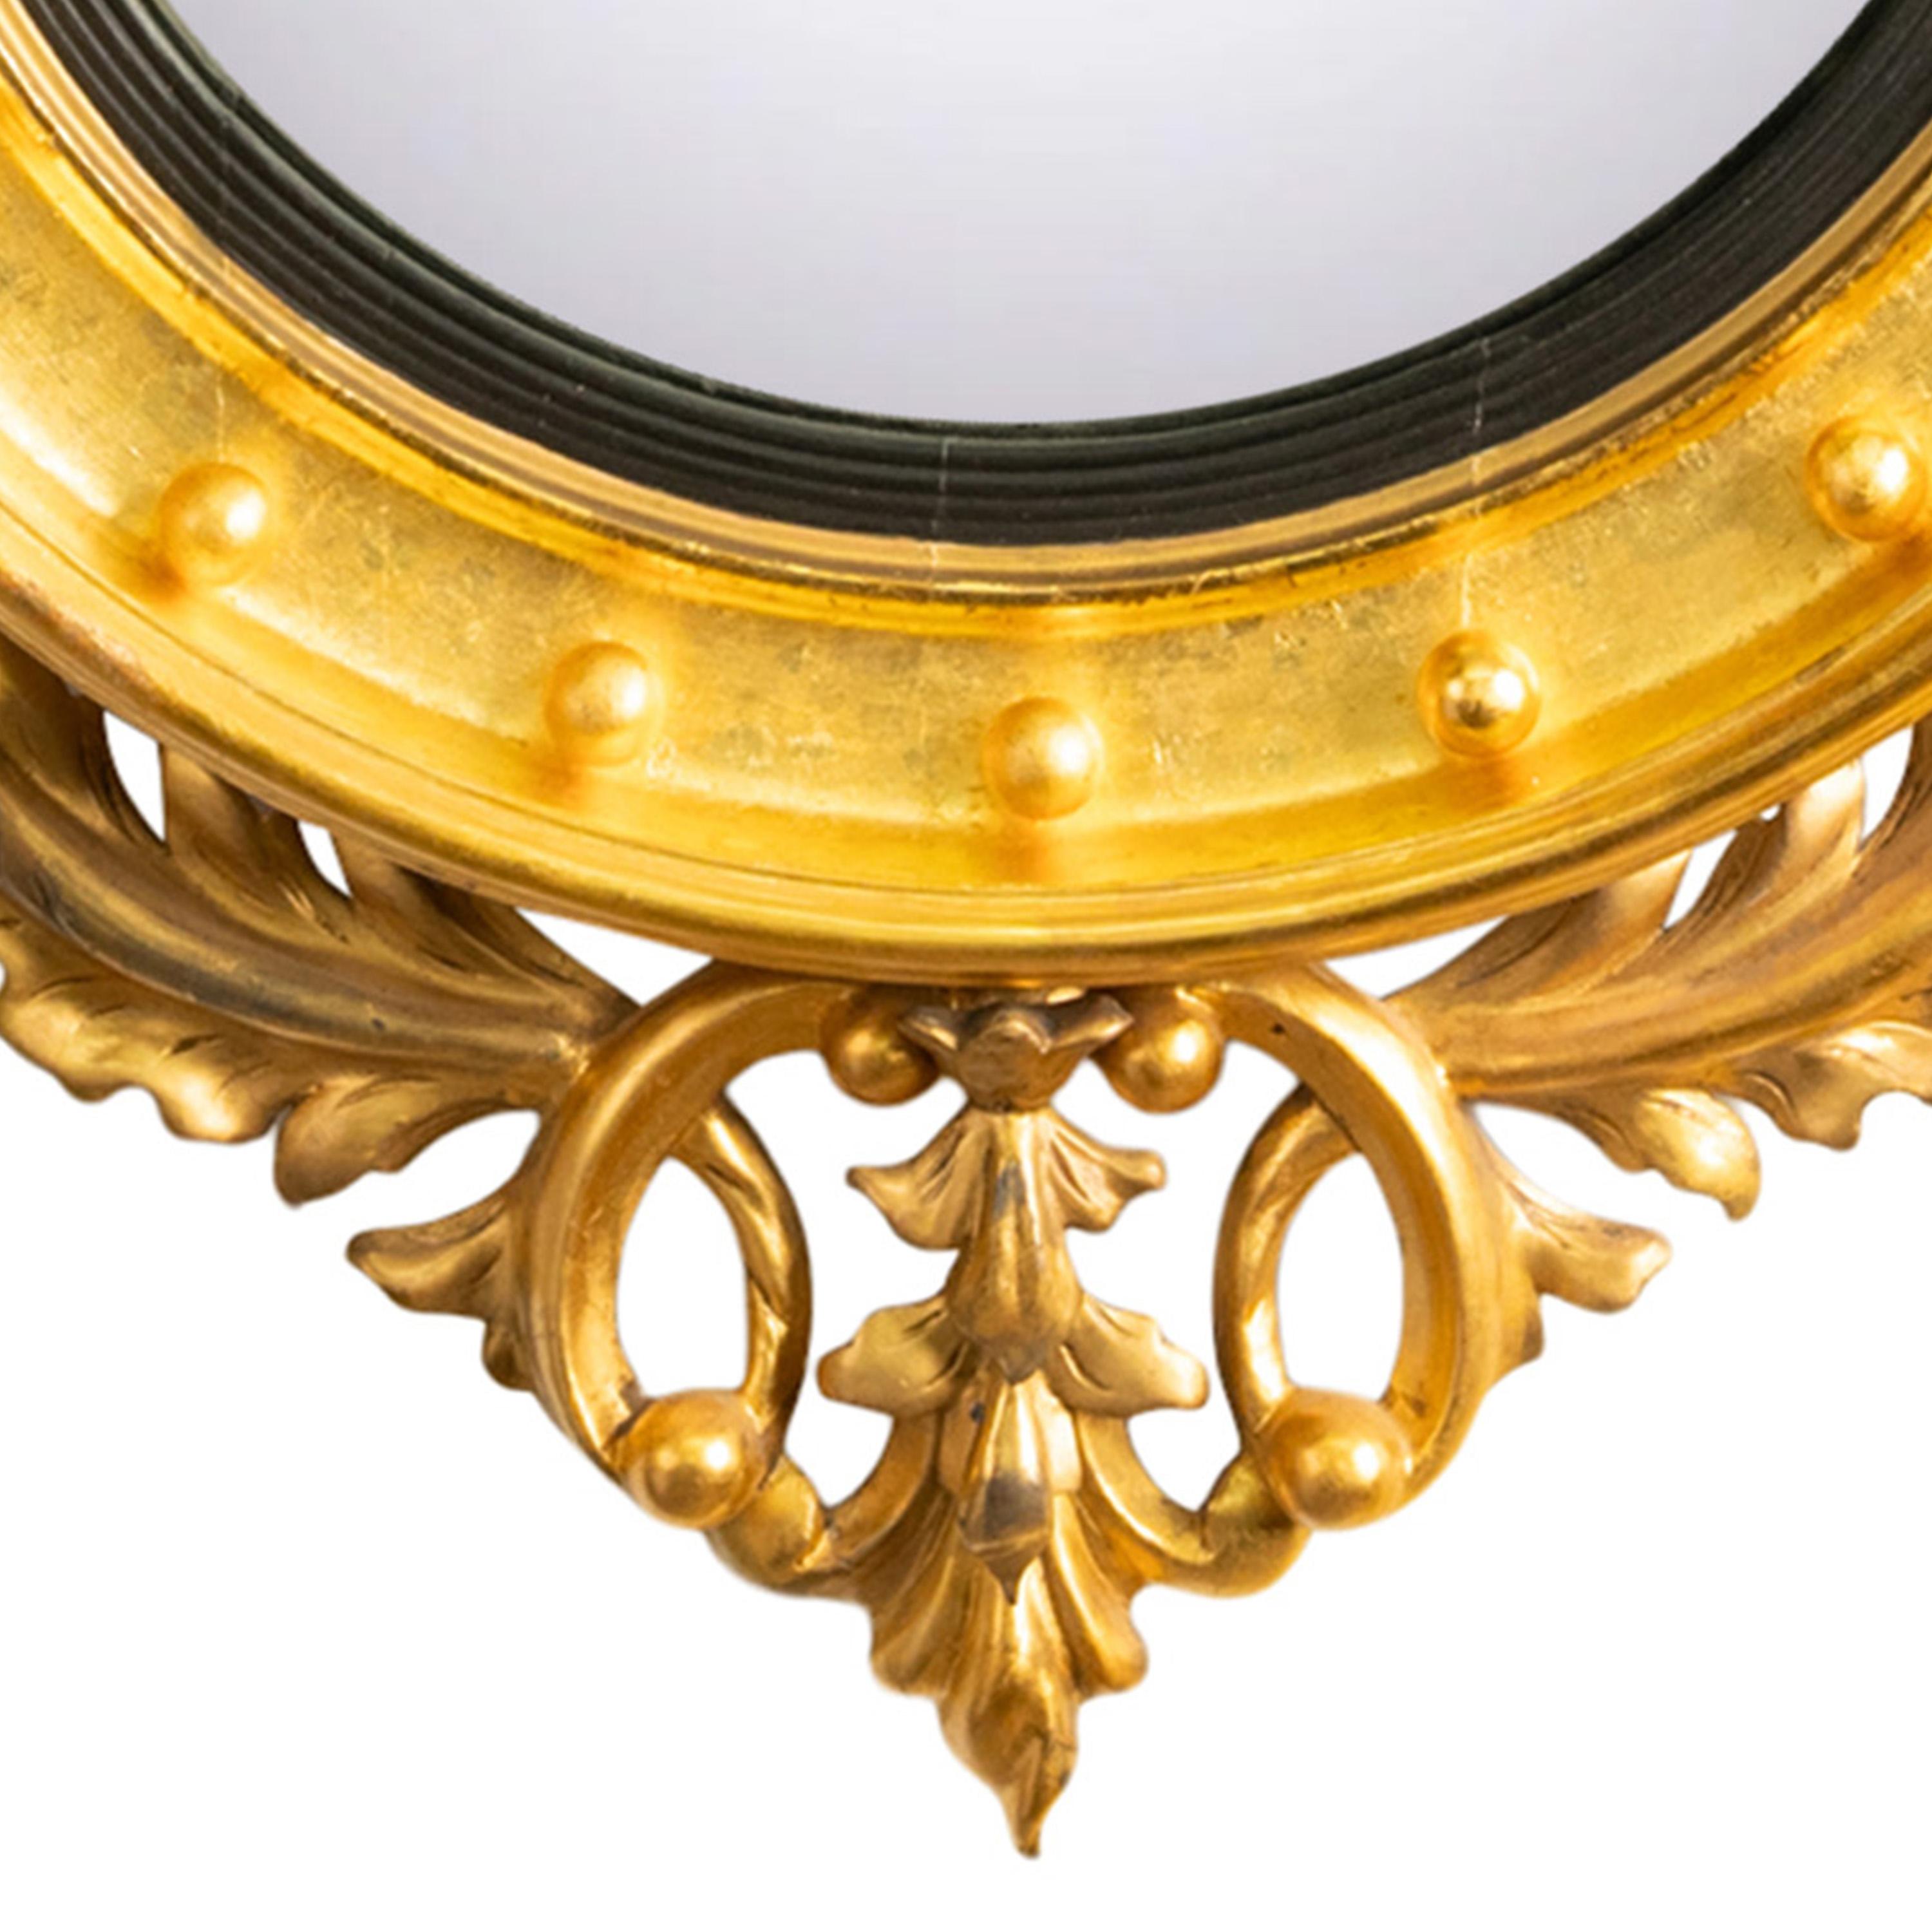 Antique Early 19thC American Federal Period Convex Gilt Wood Eagle Mirror 1820 For Sale 4